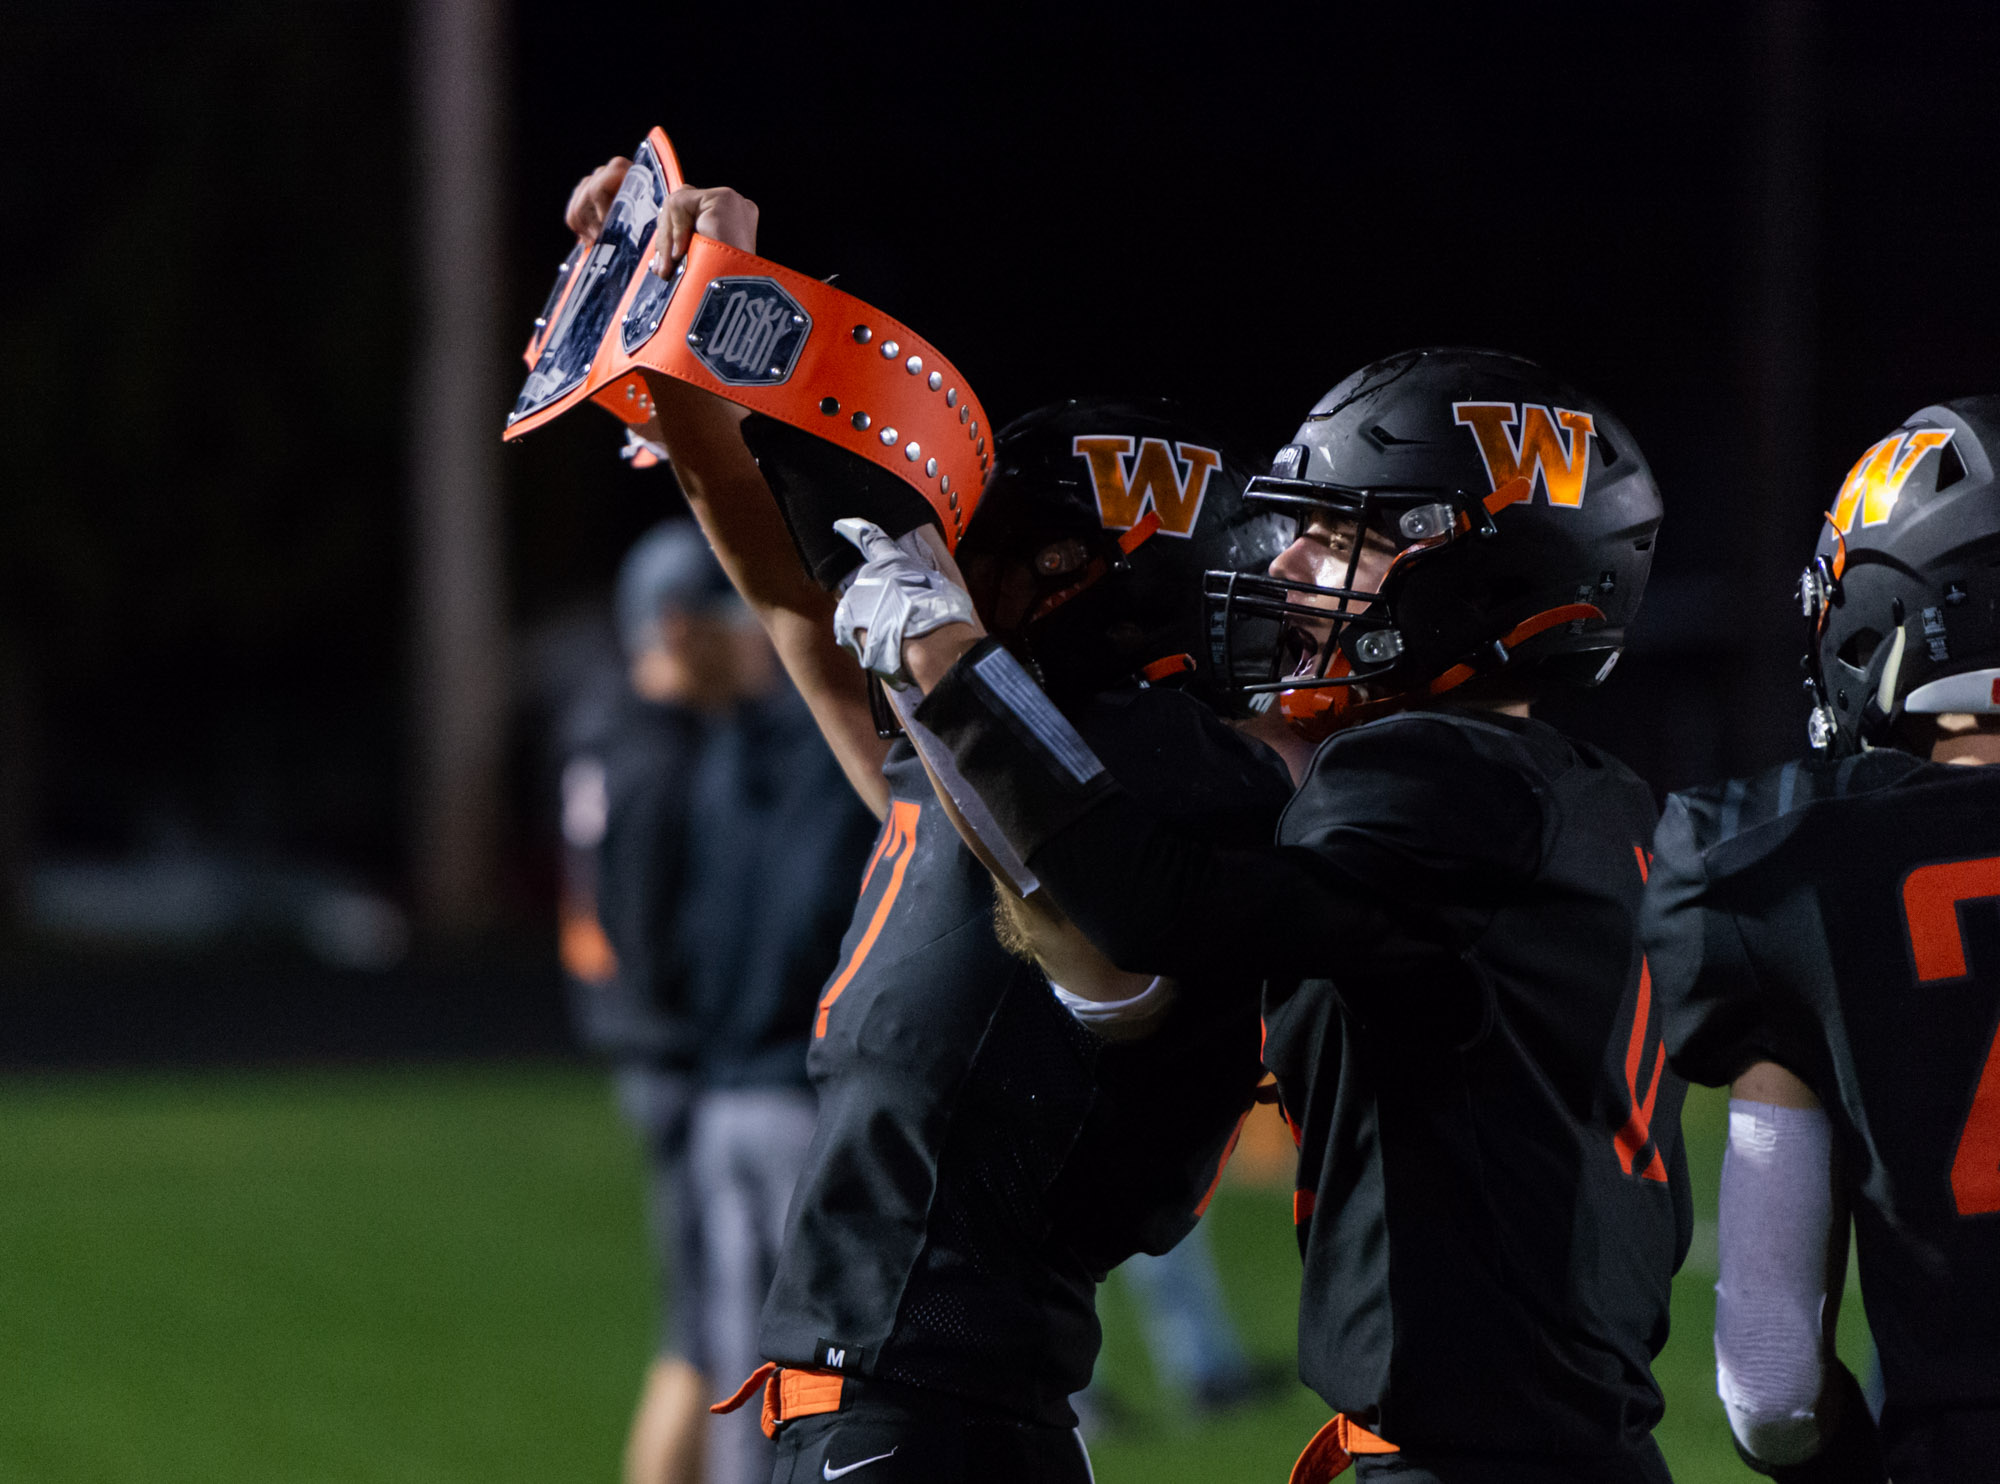 Washougal's Garrett Mansfield lifts the turnover belt after recovering a fumble in a 2A Greater St. Helens League football game on Friday, Oct. 1, 2021, at Fishback Stadium in Washougal. Ridgefield won 39-13.